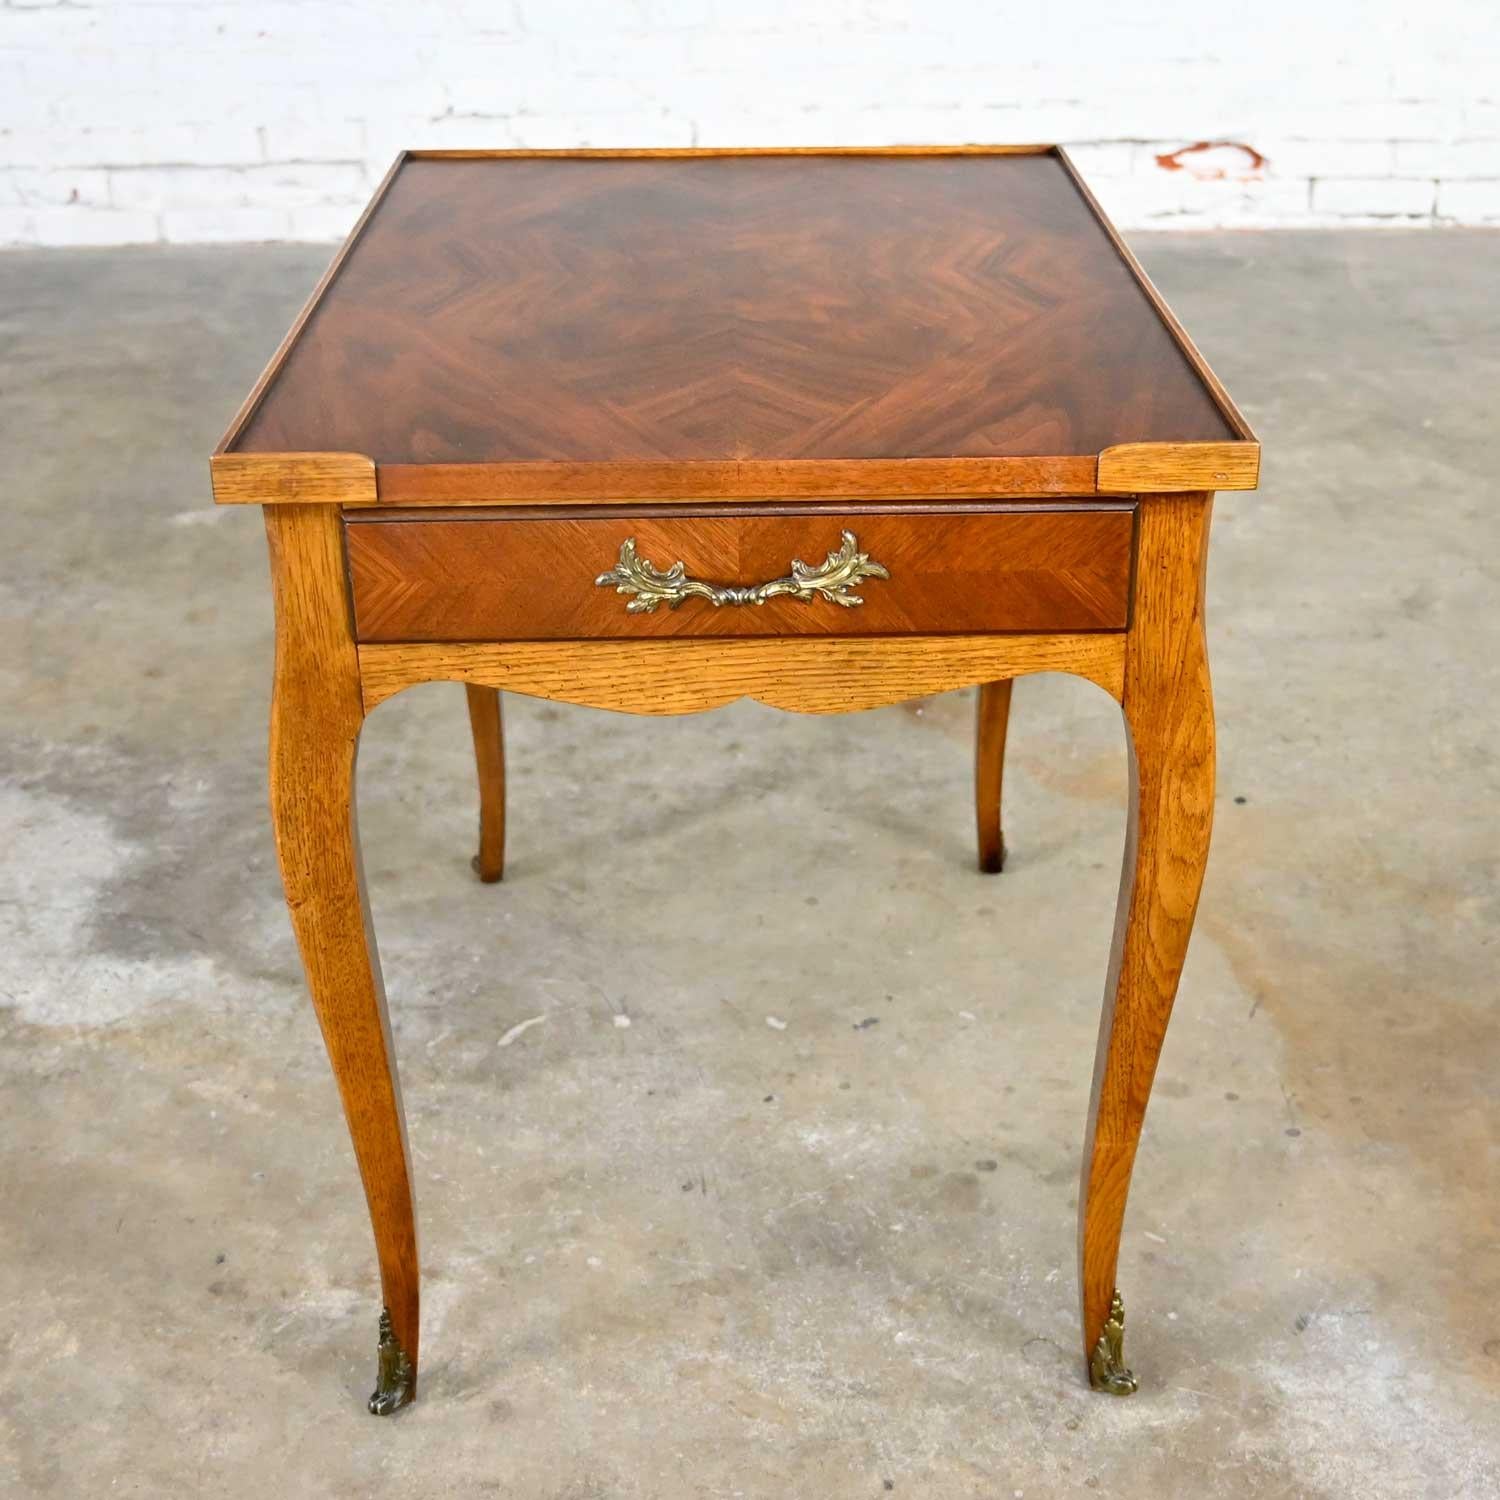 Vintage Baker French Louis XV Style End Table with Brass Ormalu Details In Good Condition For Sale In Topeka, KS